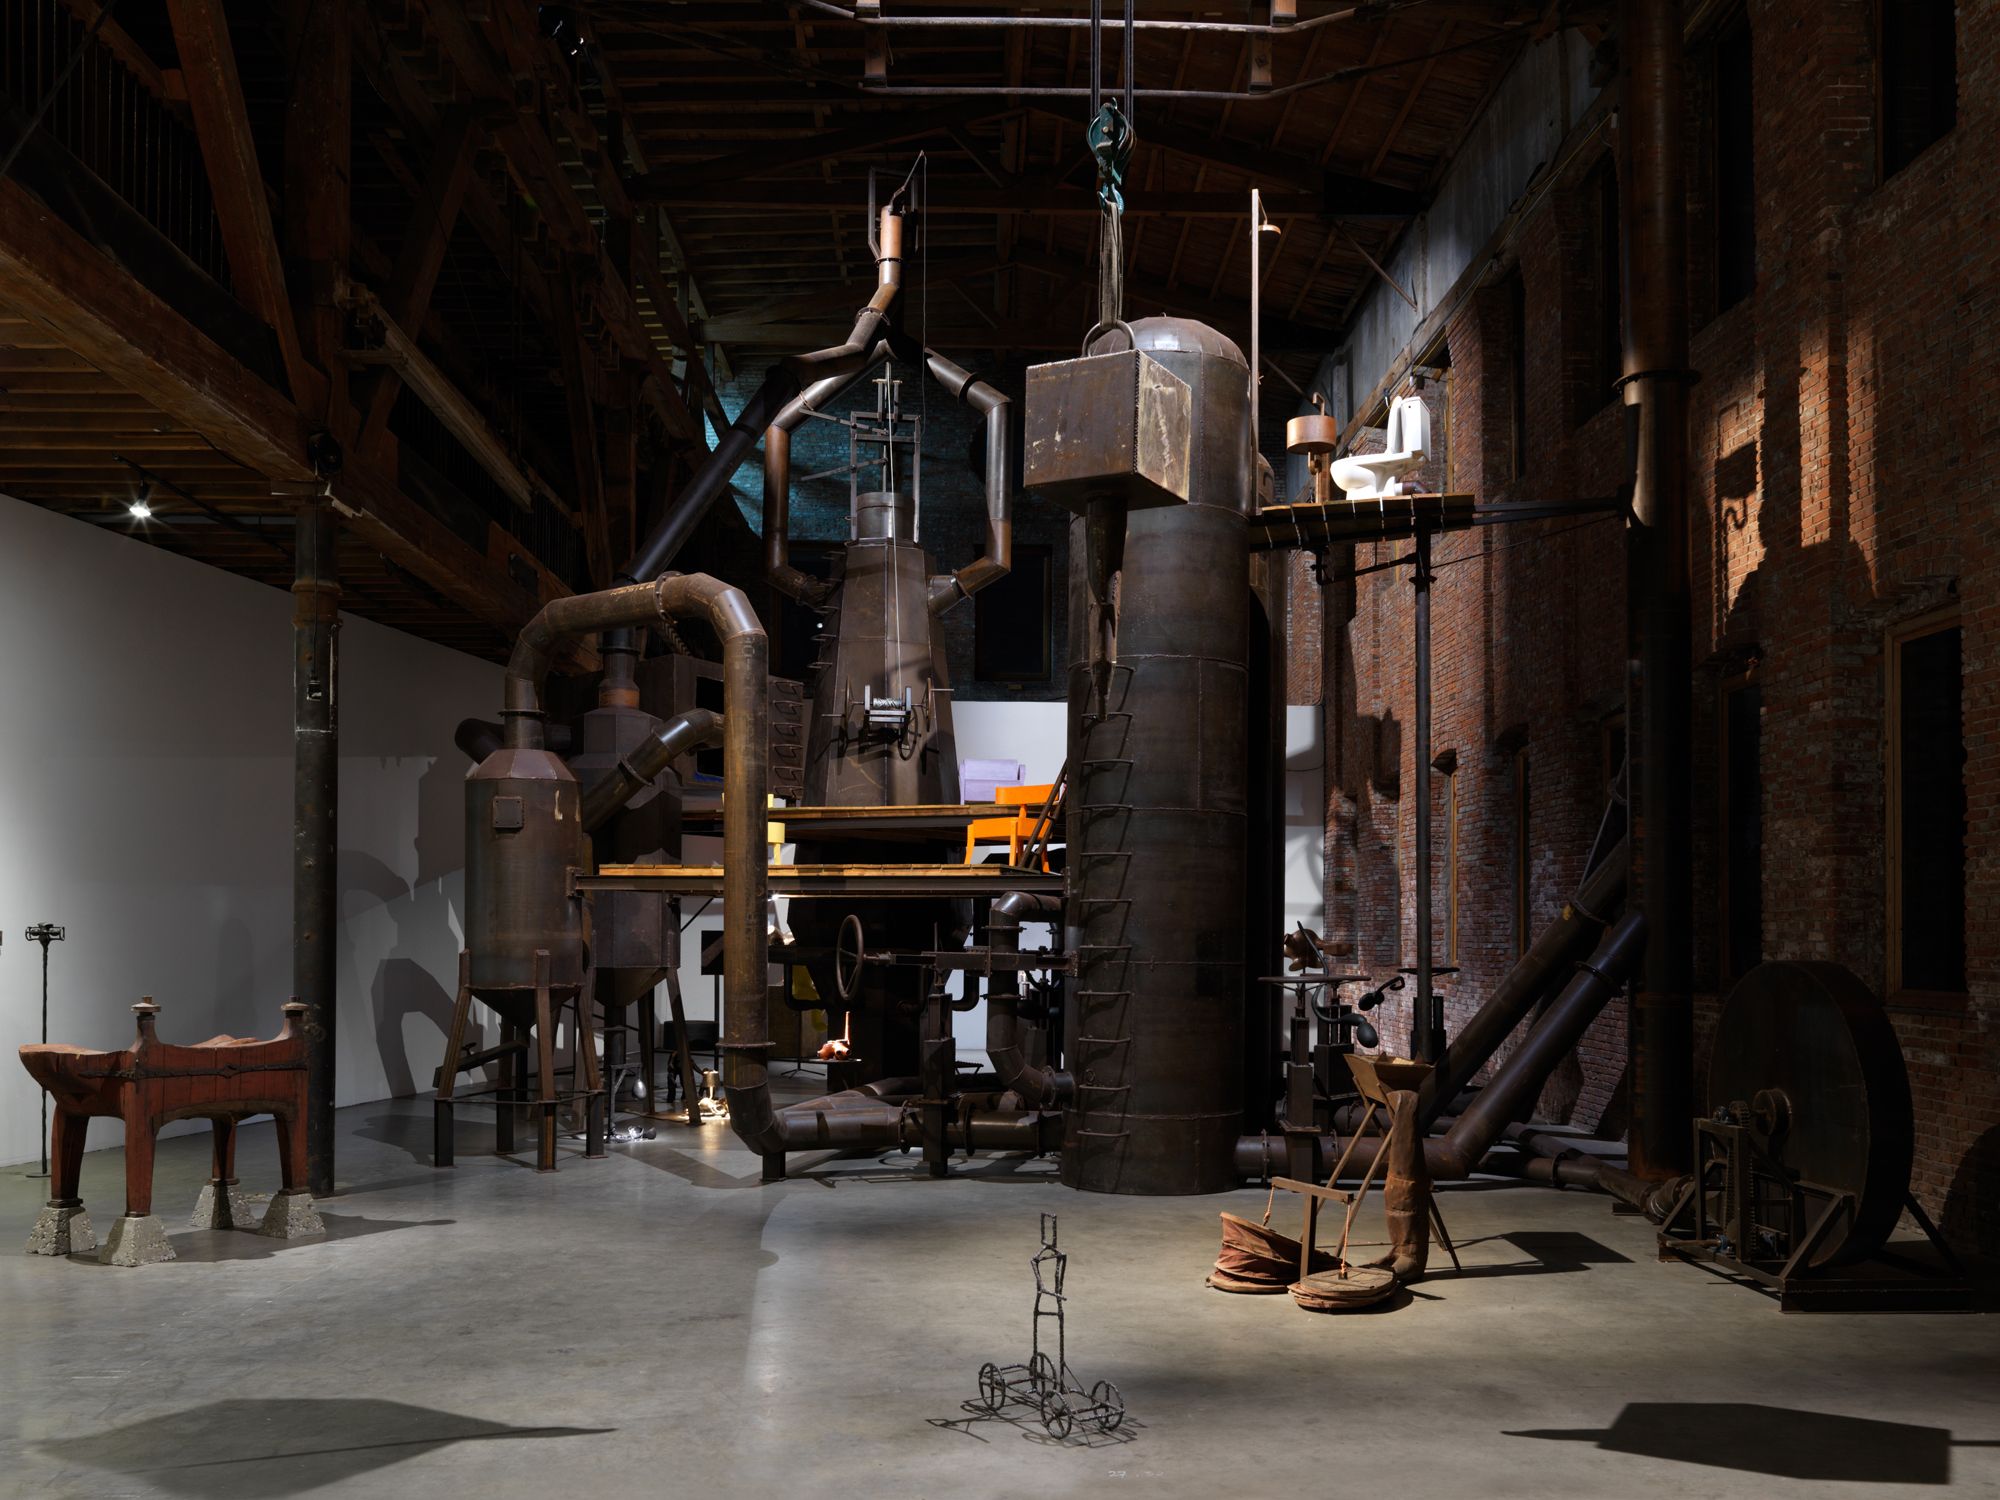 A massive, mock blast furnace fills an enormous warehouse space.